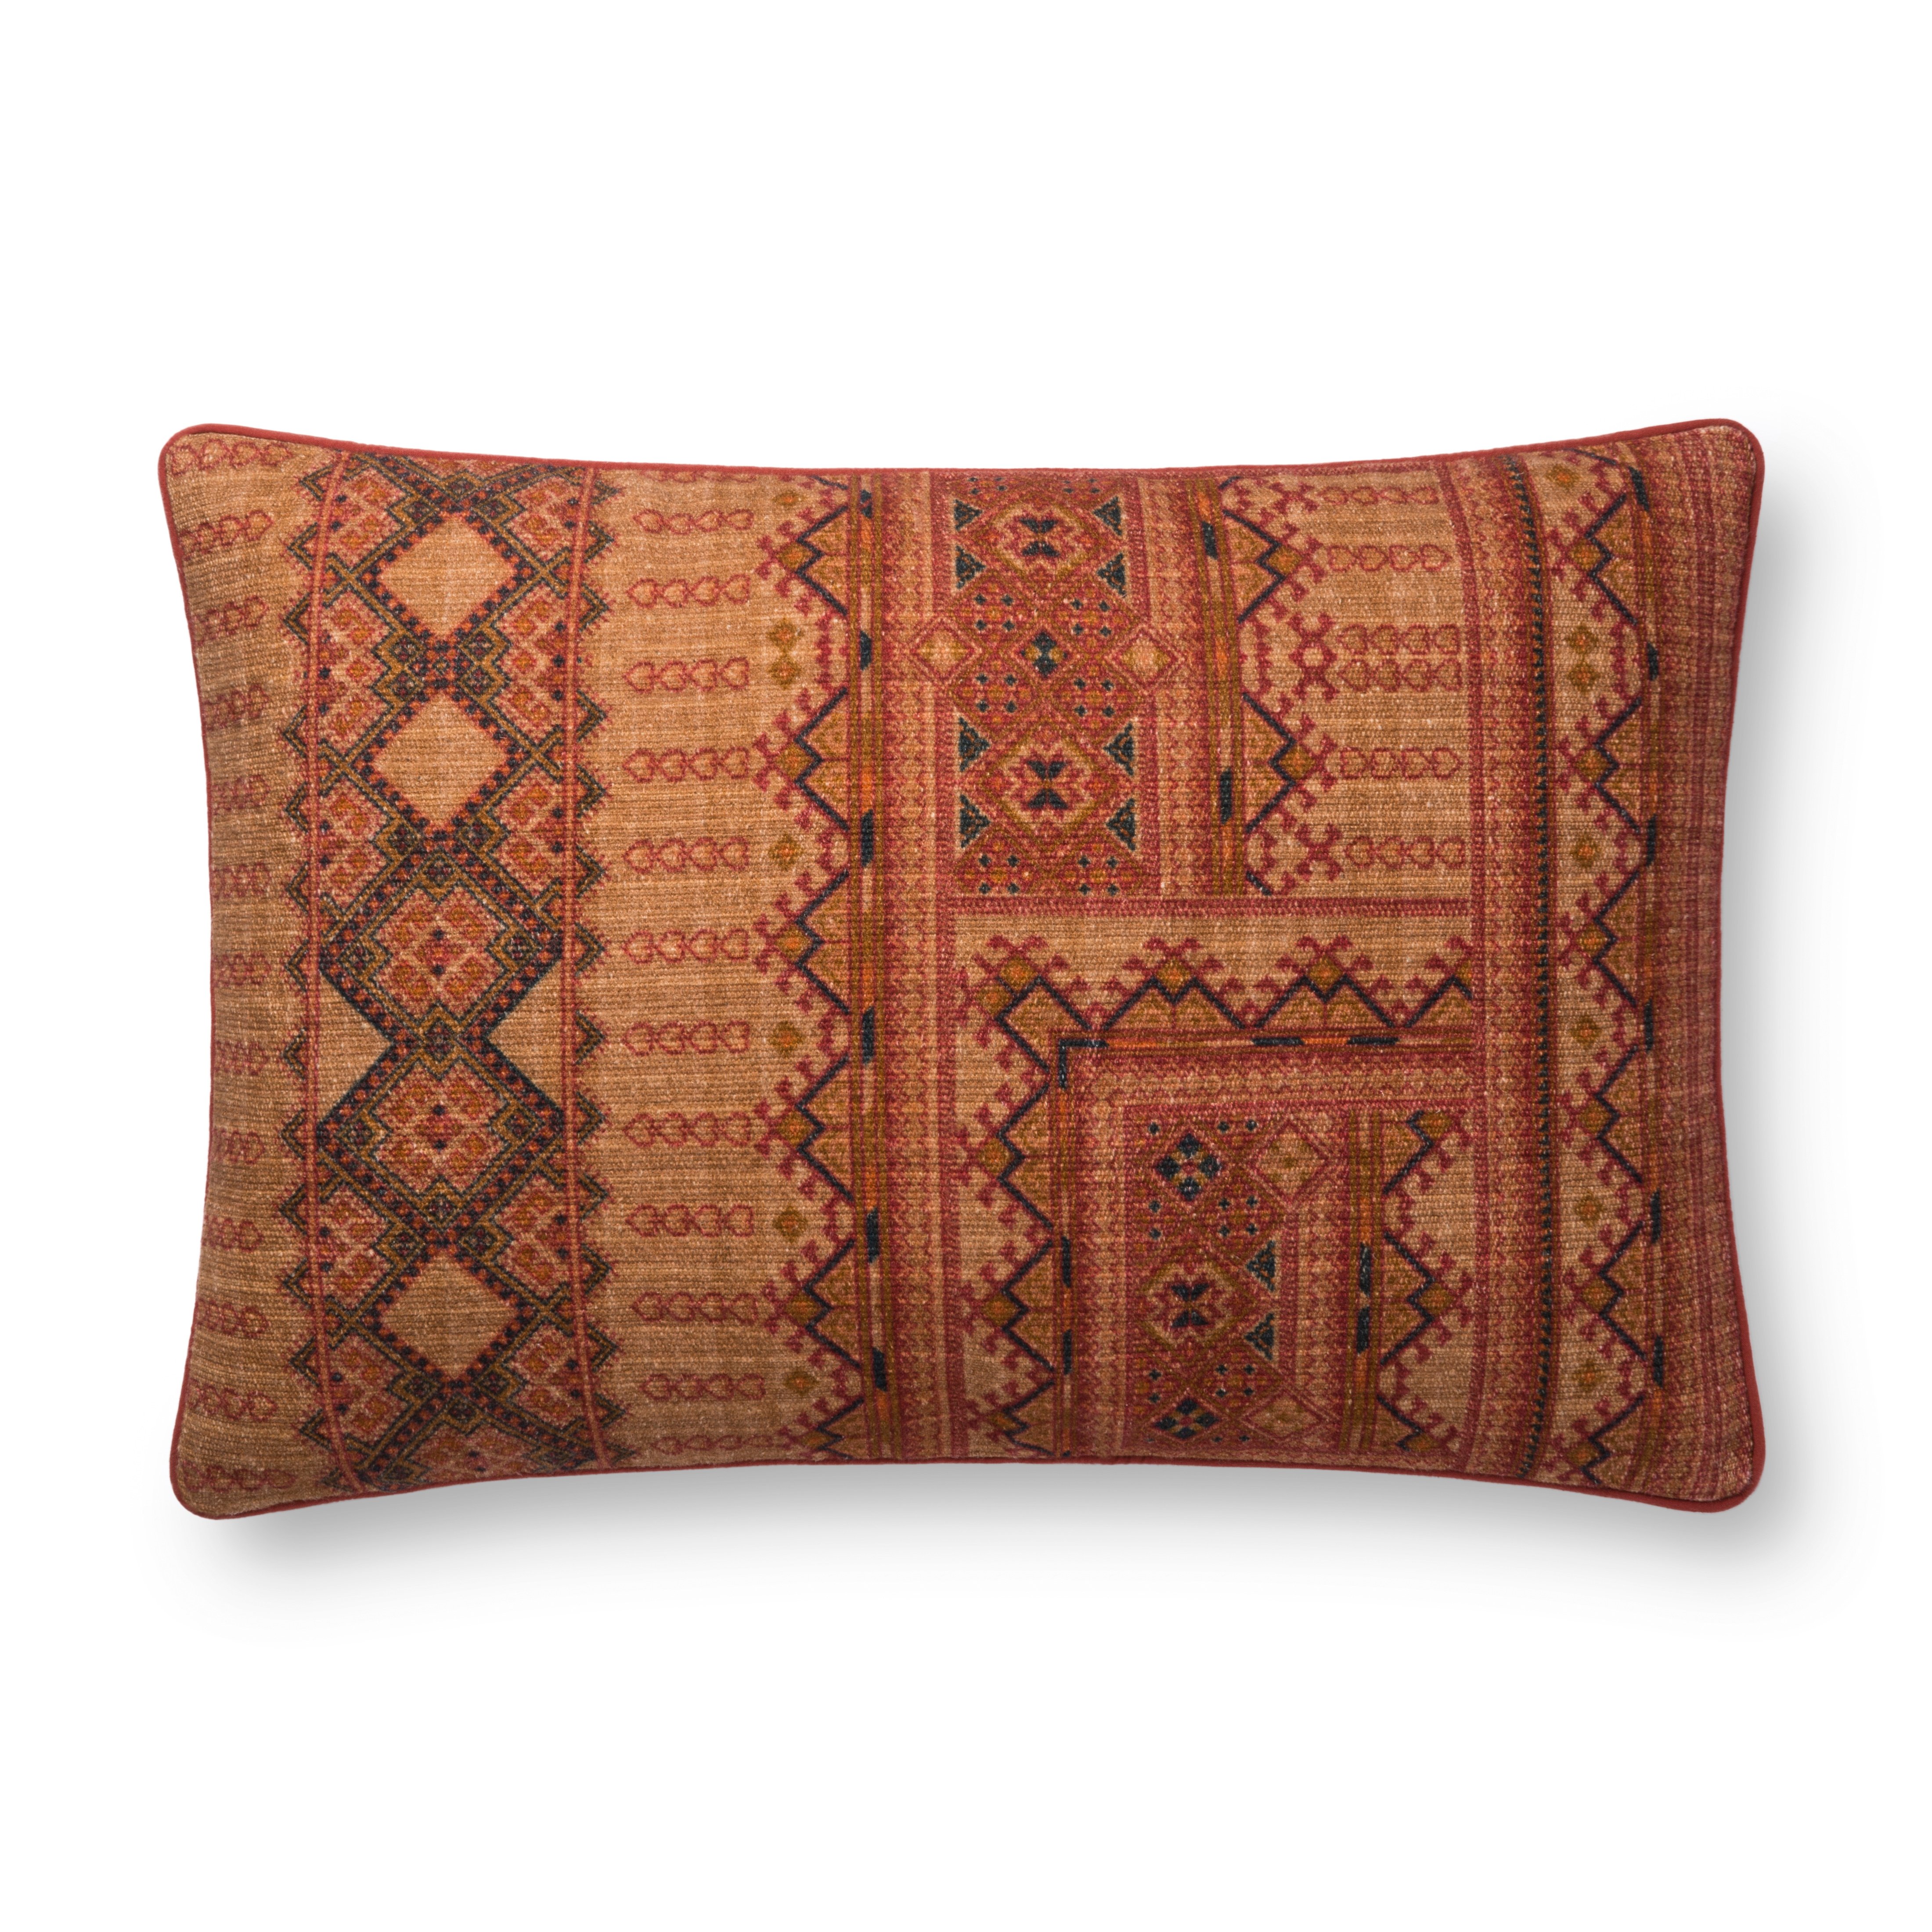 Justina Blakeney x Loloi PILLOWS P0778 Rust 16" x 26" Cover Only - Image 0